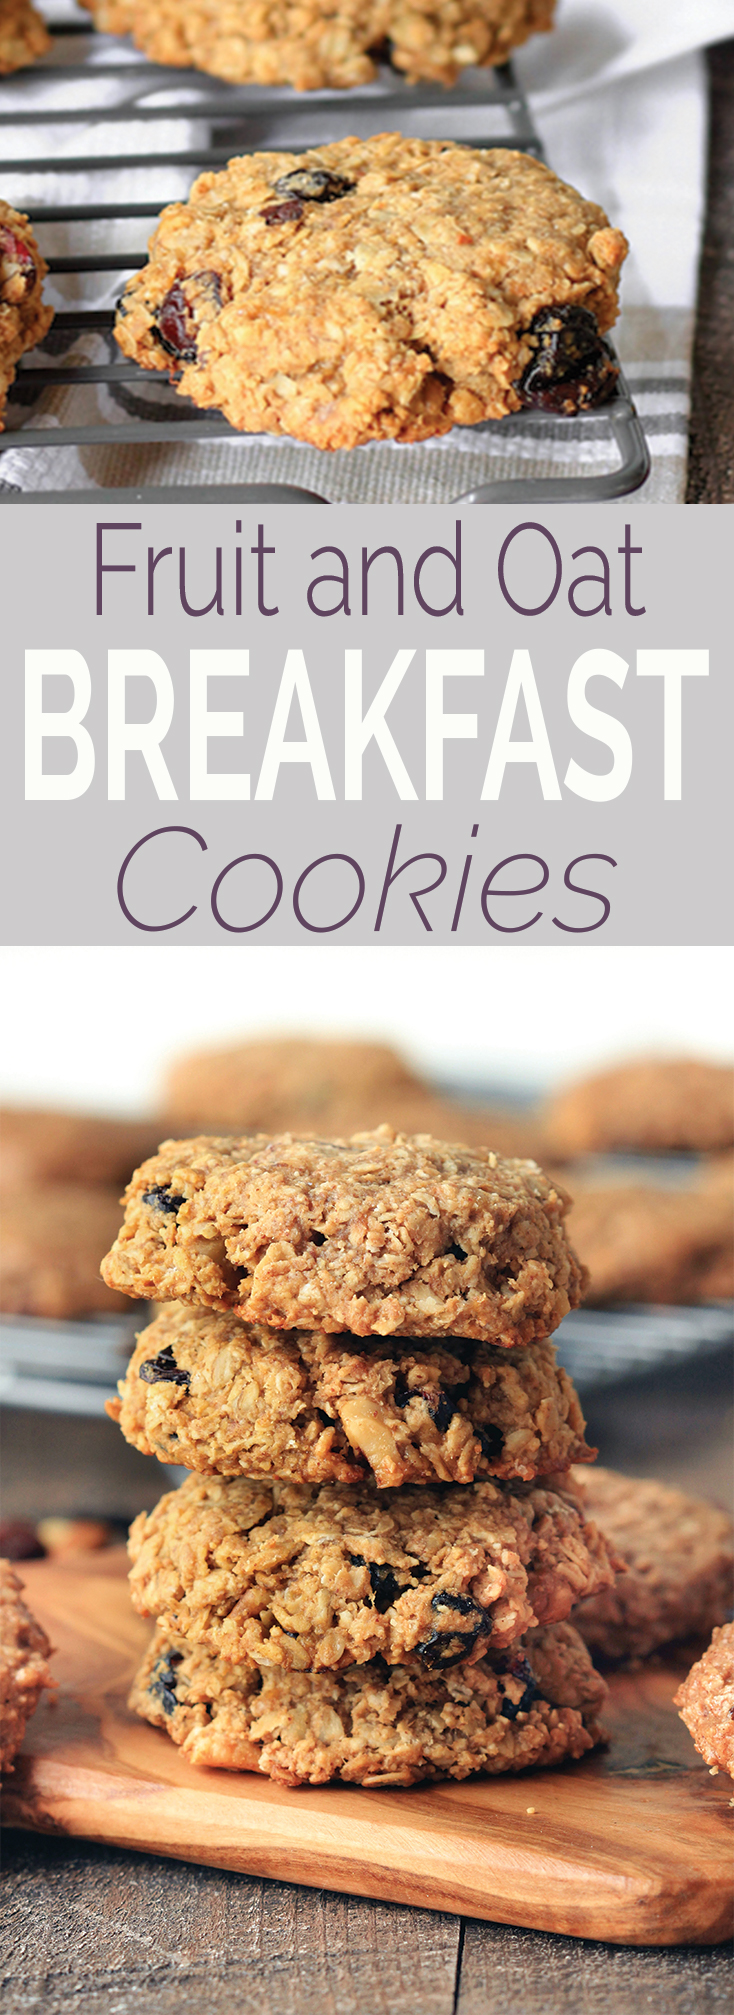 Healthy fruit and oat breakfast cookies (freezer-friendly) are simple to make, requiring only 1 bowl and 10 ingredients. Vegan, gluten-free, perfectly sweet and chewy, and the perfect snack or on-the-go-breakfast. #BRMOats #Ad